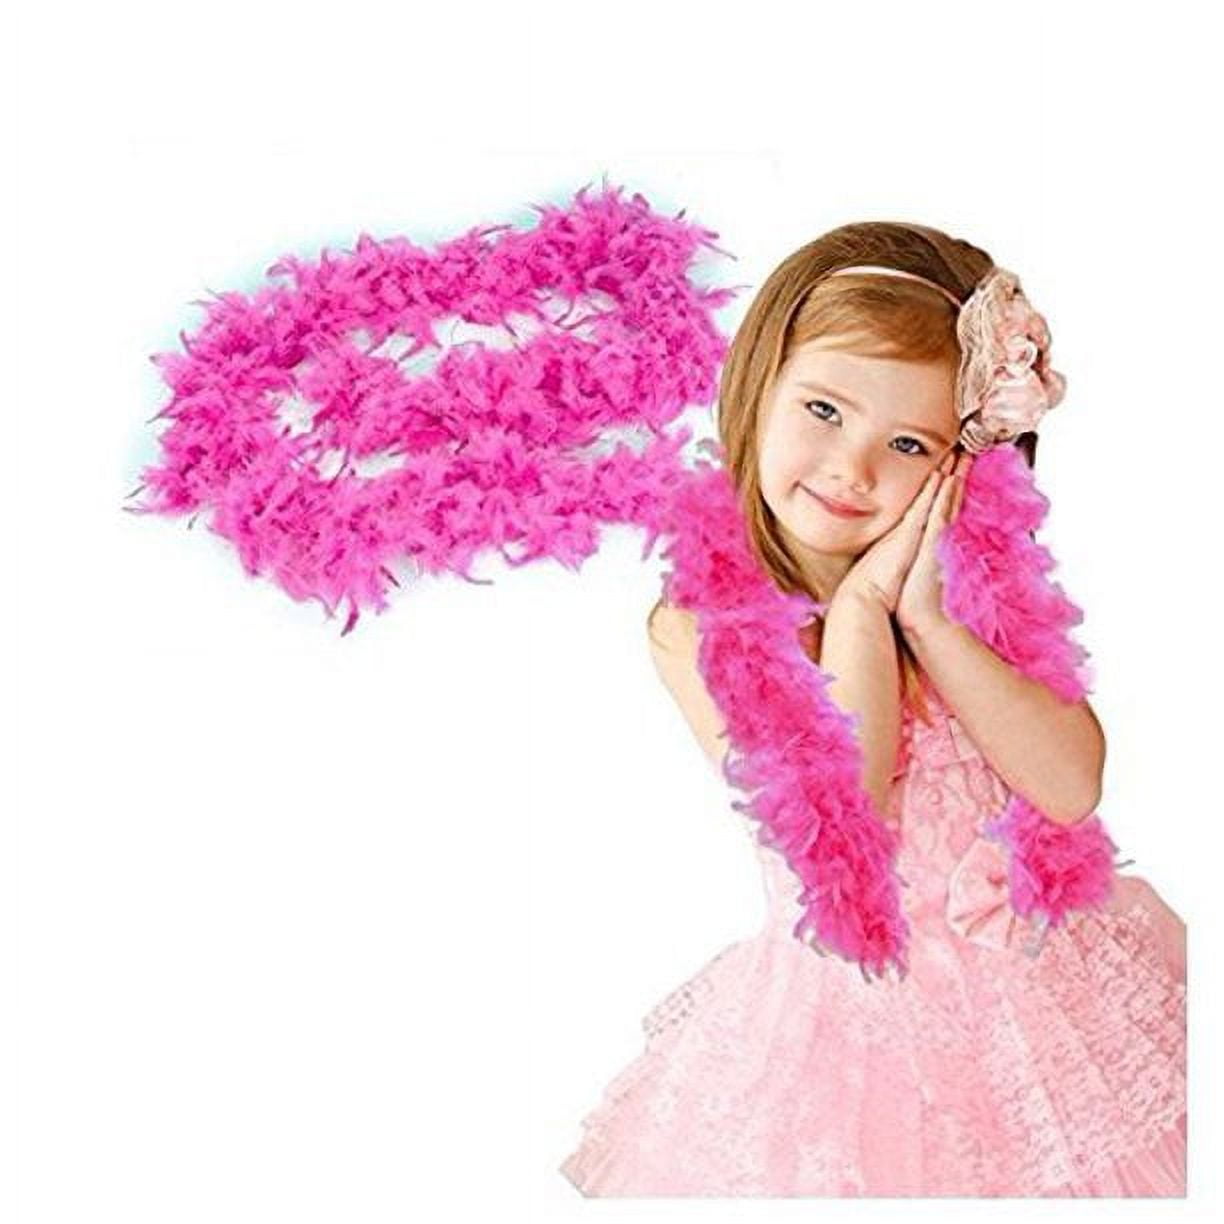 Larryhot Hot Pink Feather Boa - 80g 2Yards Feather Boas for Women,Dancing  Craftting Party Dress Up and Festival Decoration (80g - Hot Pink) :  Clothing, Shoes & Jewelry 